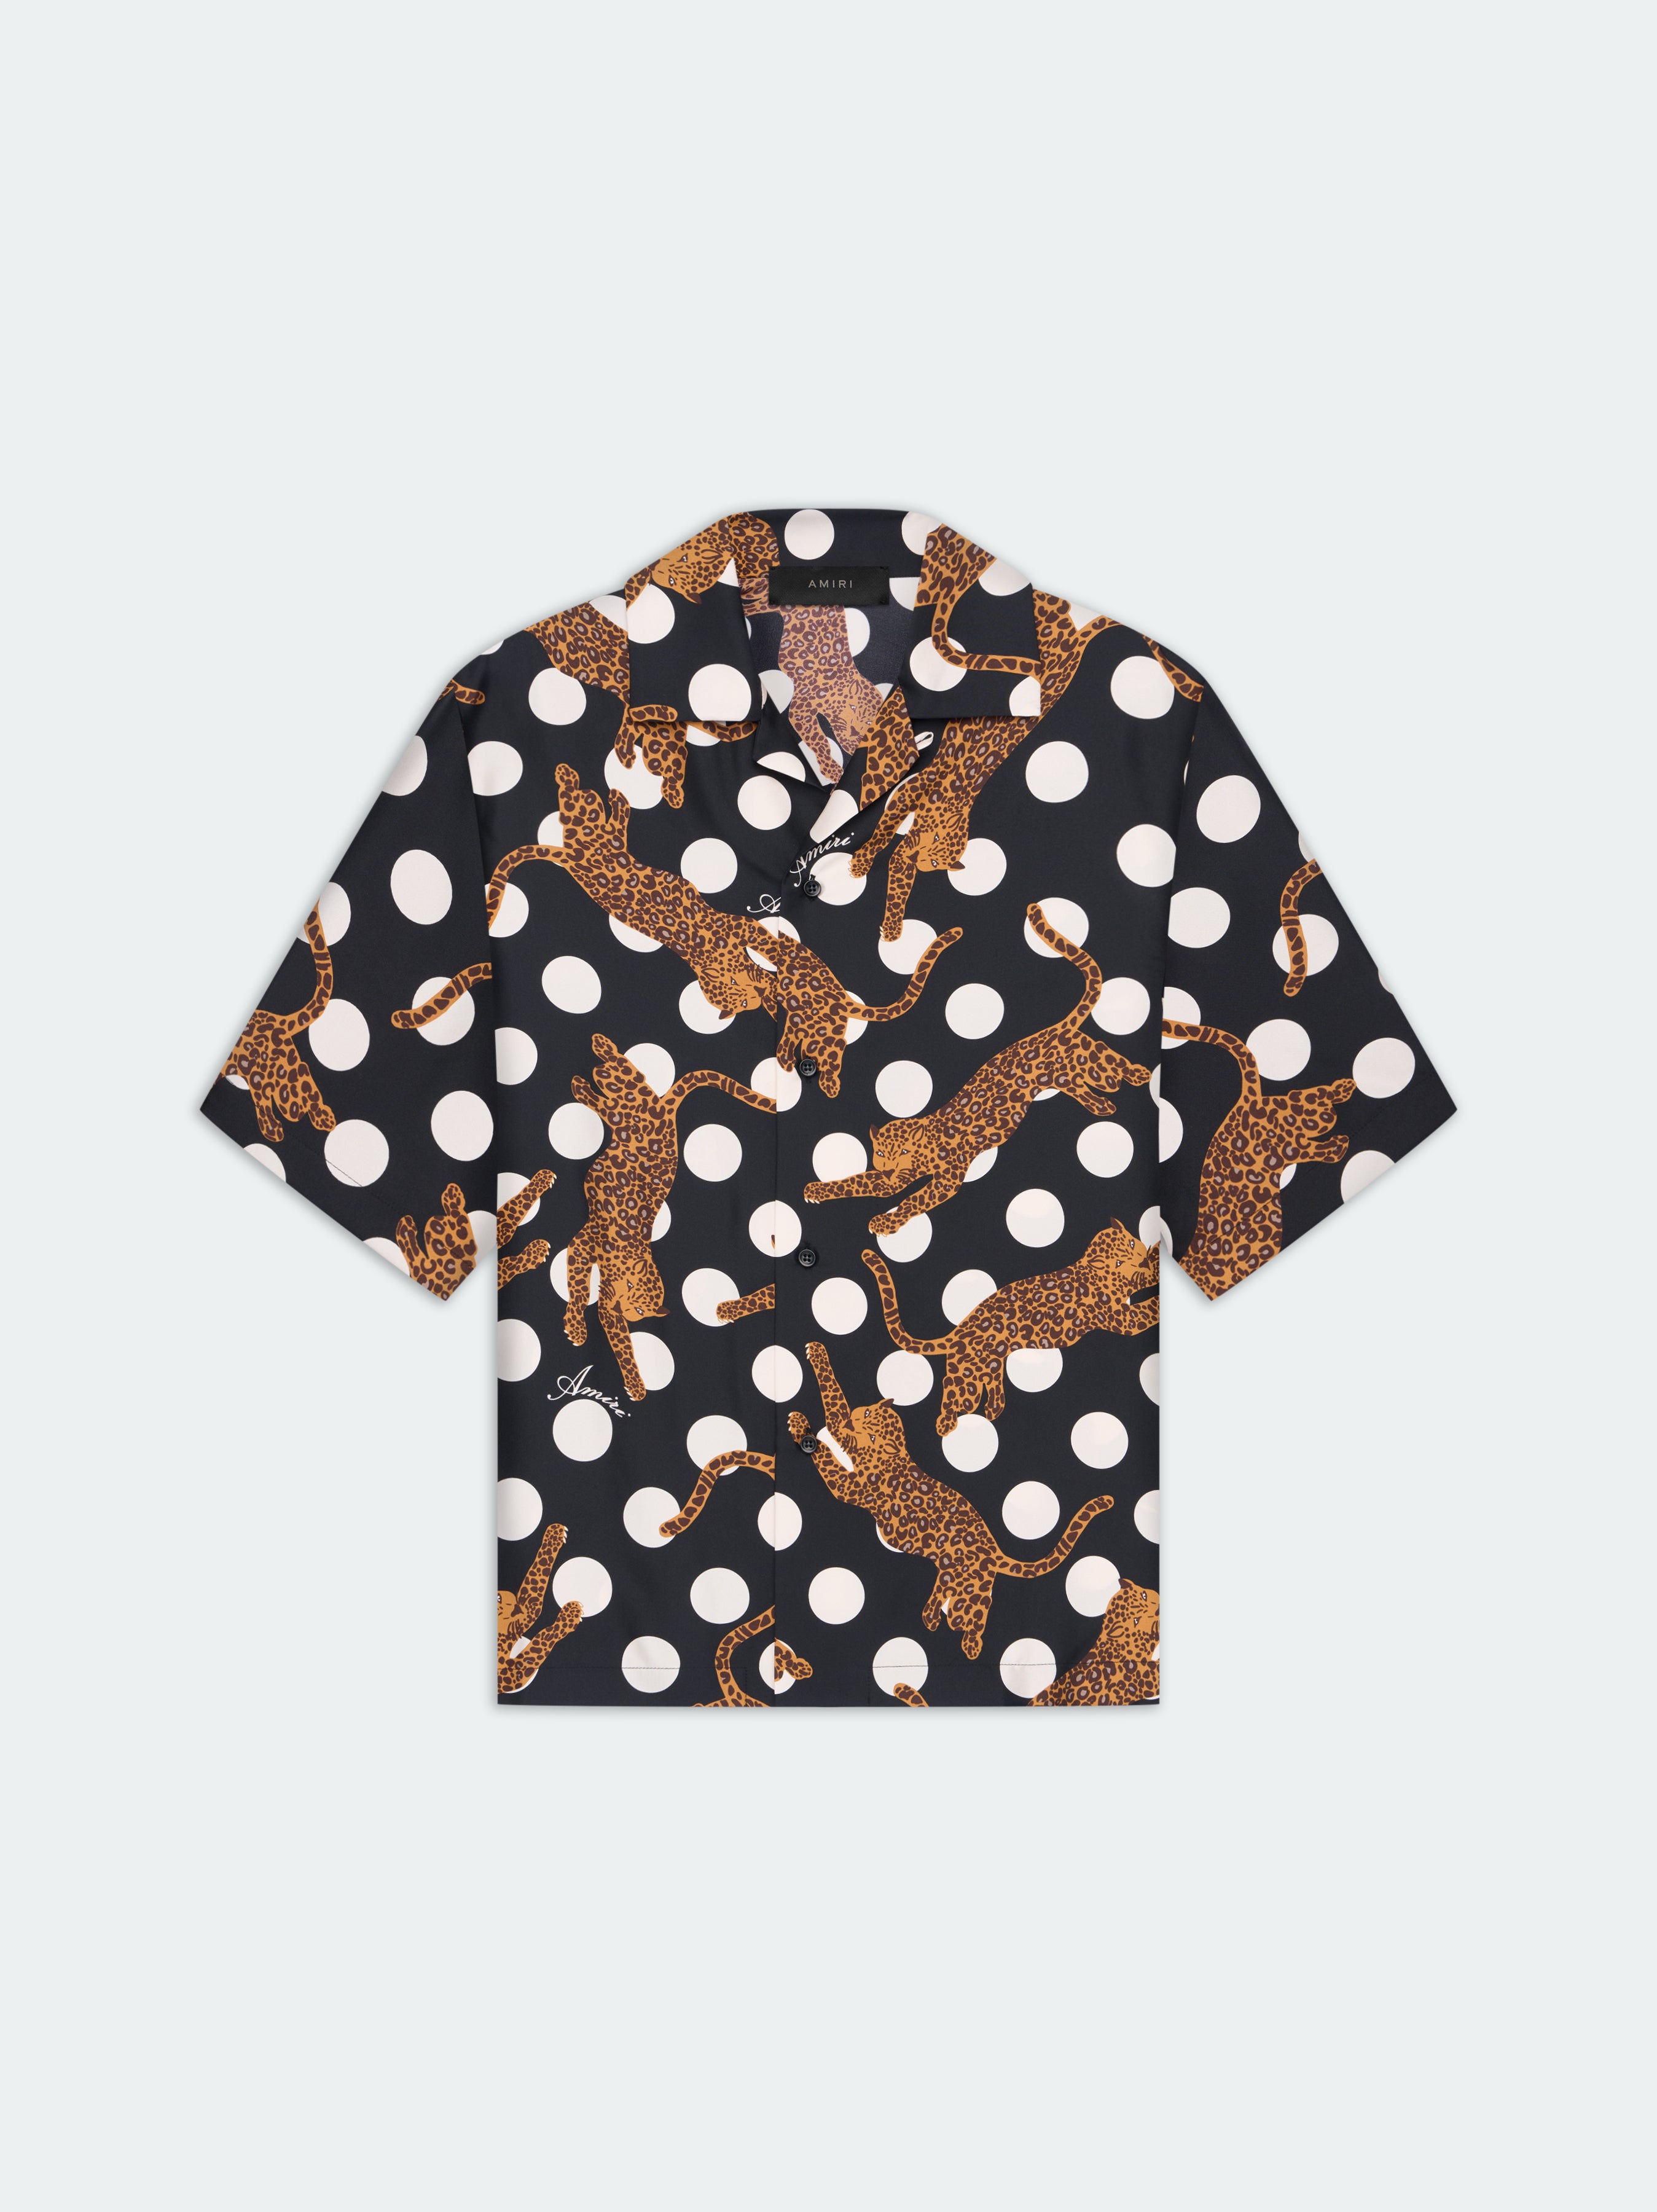 Product LEOPARD POLKA DOTS BOWLING SHIRT - Black featured image